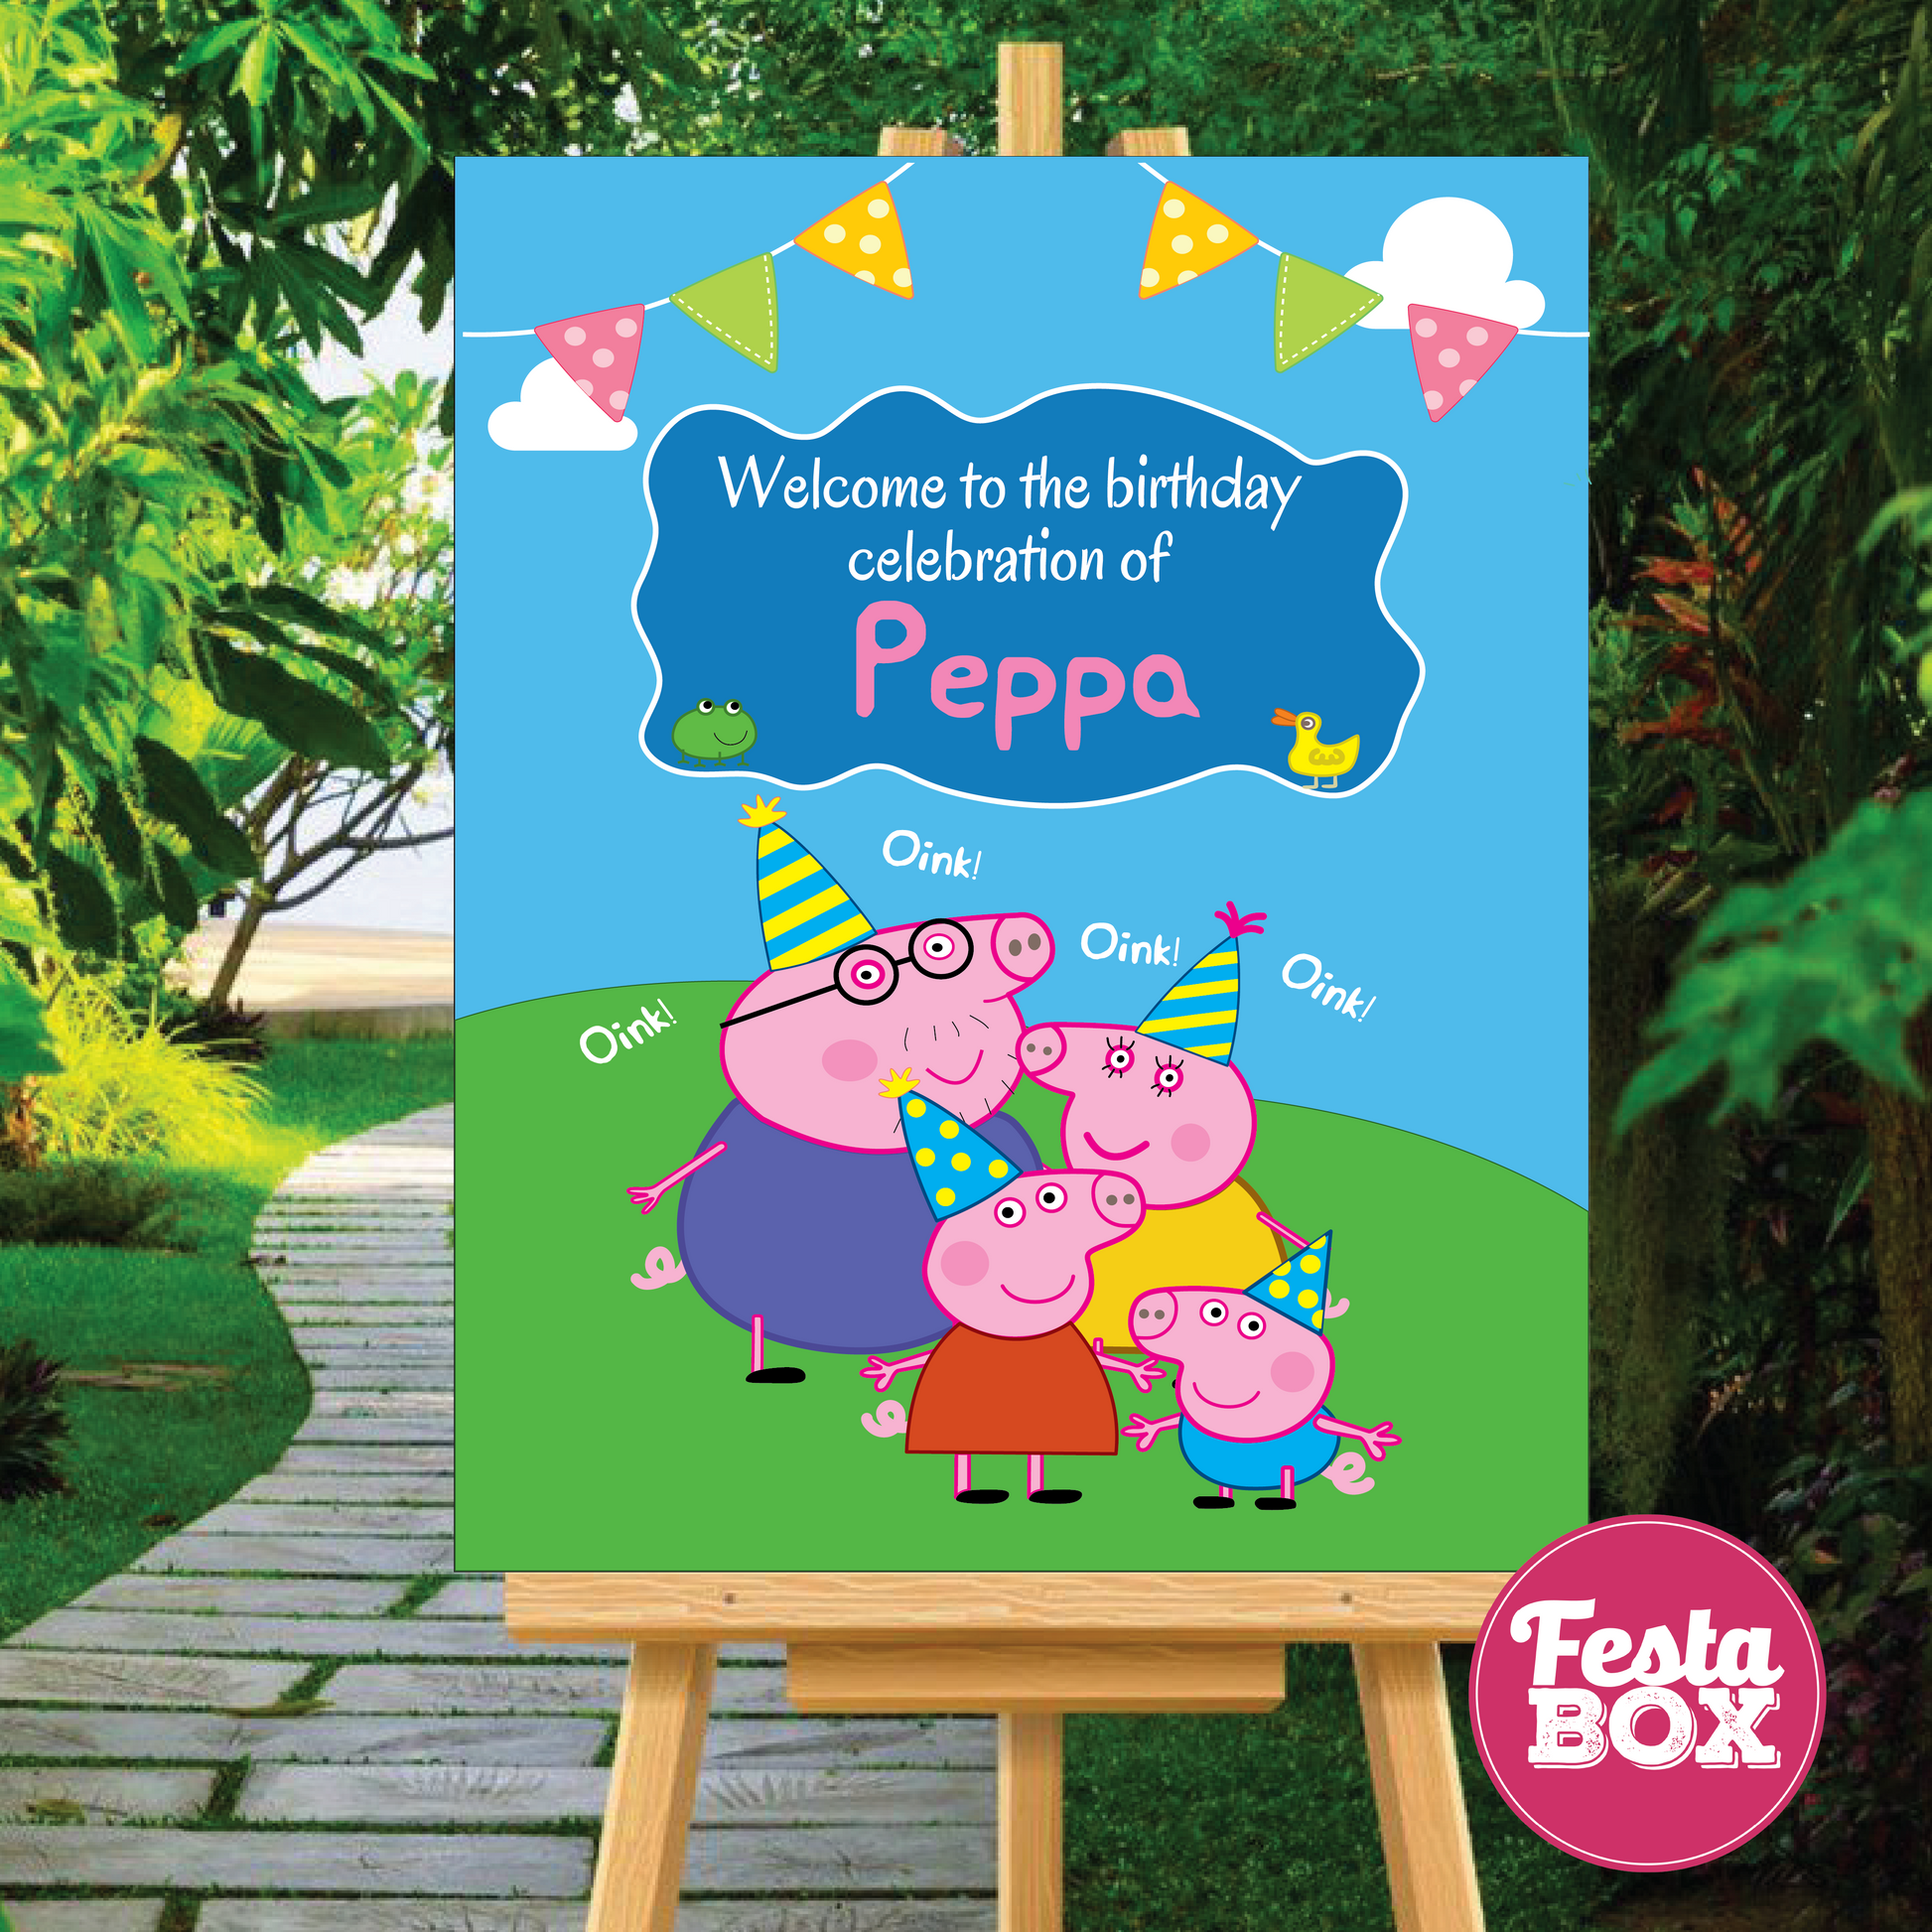 Welcome Sign for Birthday Party Decoration - Peppa Pig Theme